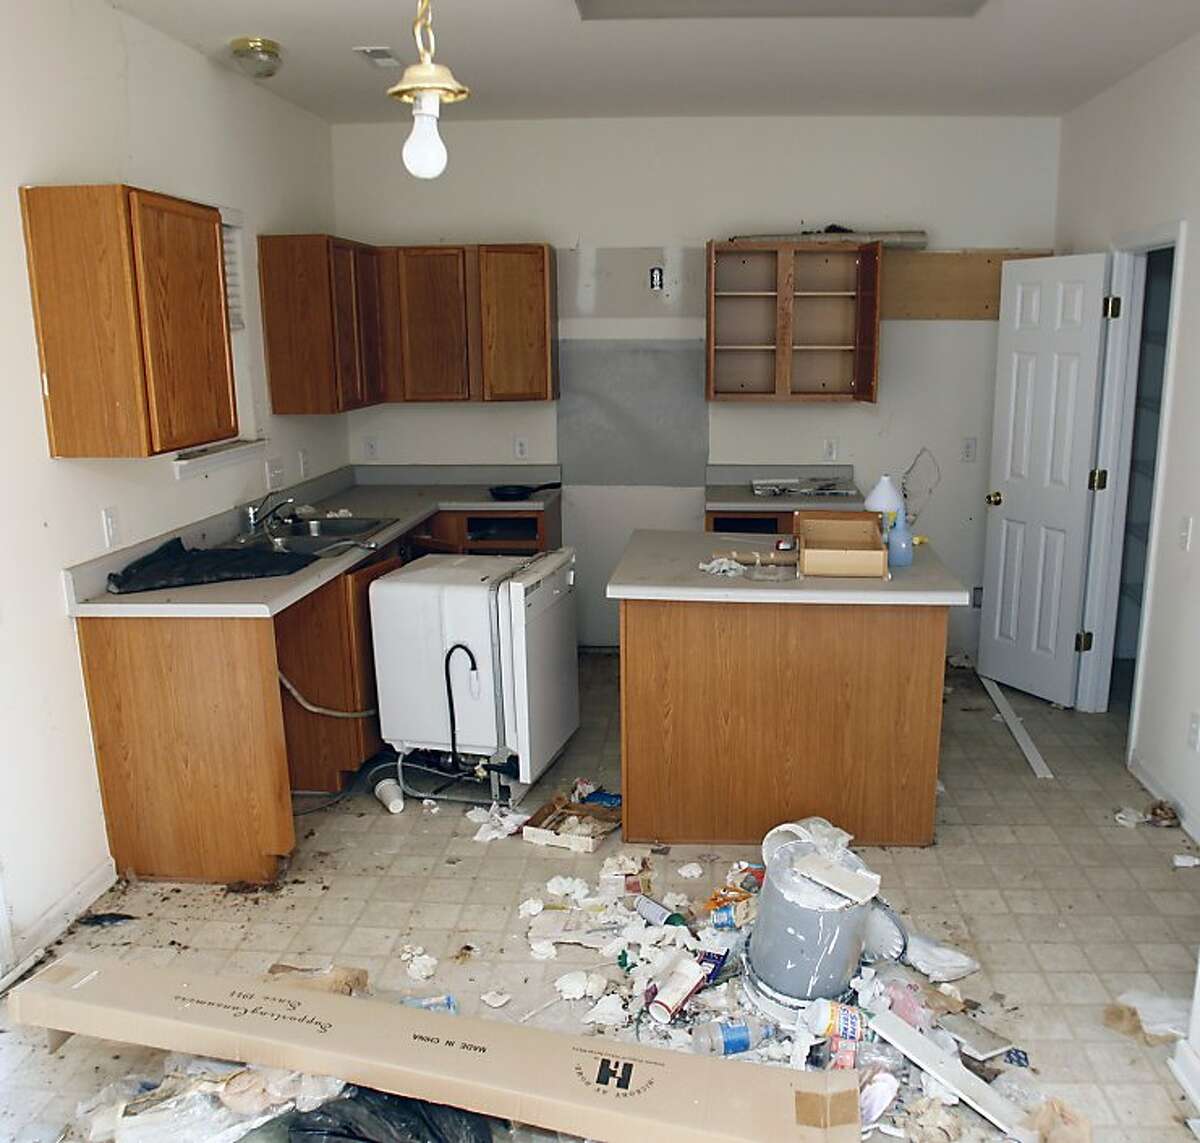 ** ADVANCE FOR USE SUNDAY, MARCH 27, 2011 AND THEREAFTER ** This Wednesday, Feb. 16, 2011 picture shows the interior of one of the homes in the Peachtree Hills subdivision of Charlotte, N.C. bought by the Self-Help organization for resale, many of which are vandalized. Many people sought the American Dream in starter homes here. But in this and a neighboring subdivision is a bitter lesson in how the mortgage disaster of the last few years came about, and the story of the gambles and errors that pushed theeconomy, and neighborhoods like this, over a cliff.